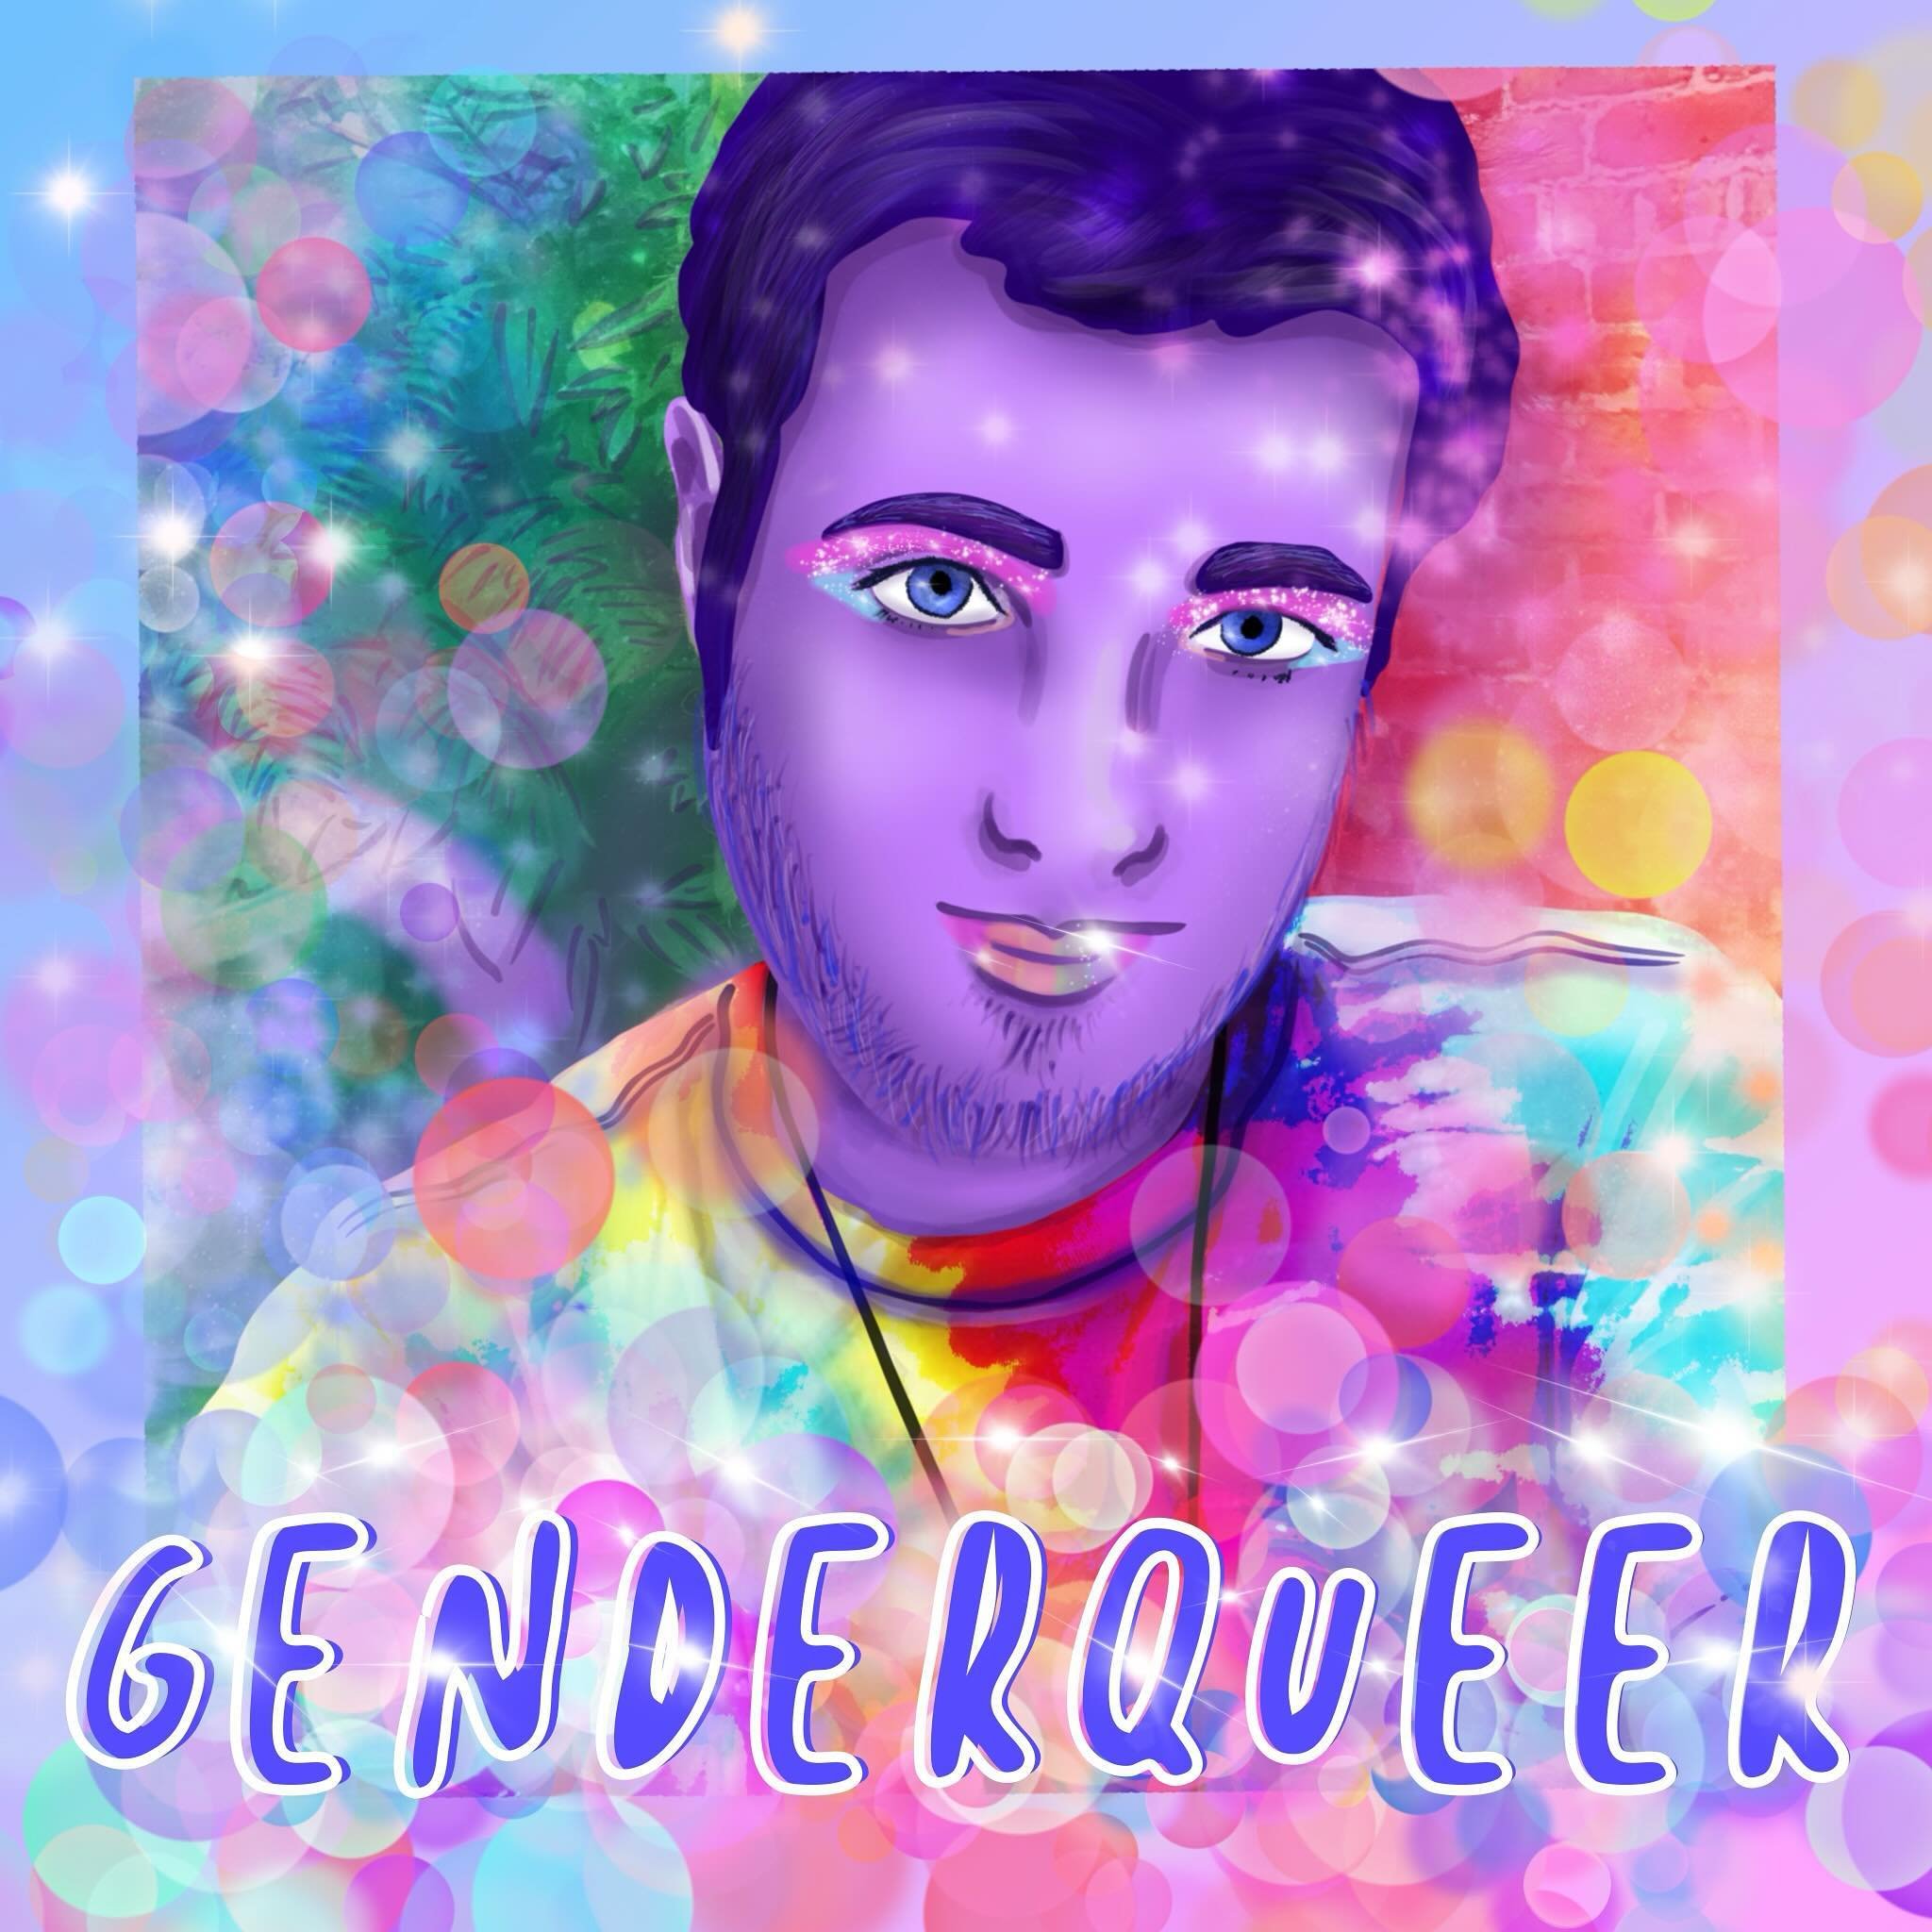 ✨ What does being genderqueer mean to me? 

Wearing glitter and hoodies, fishnets and baseball caps 
Being a galaxy of possibility 
a man and yet so much more,
transforming into simultaneous serendipitous shapes, 
not from one to another but
between,